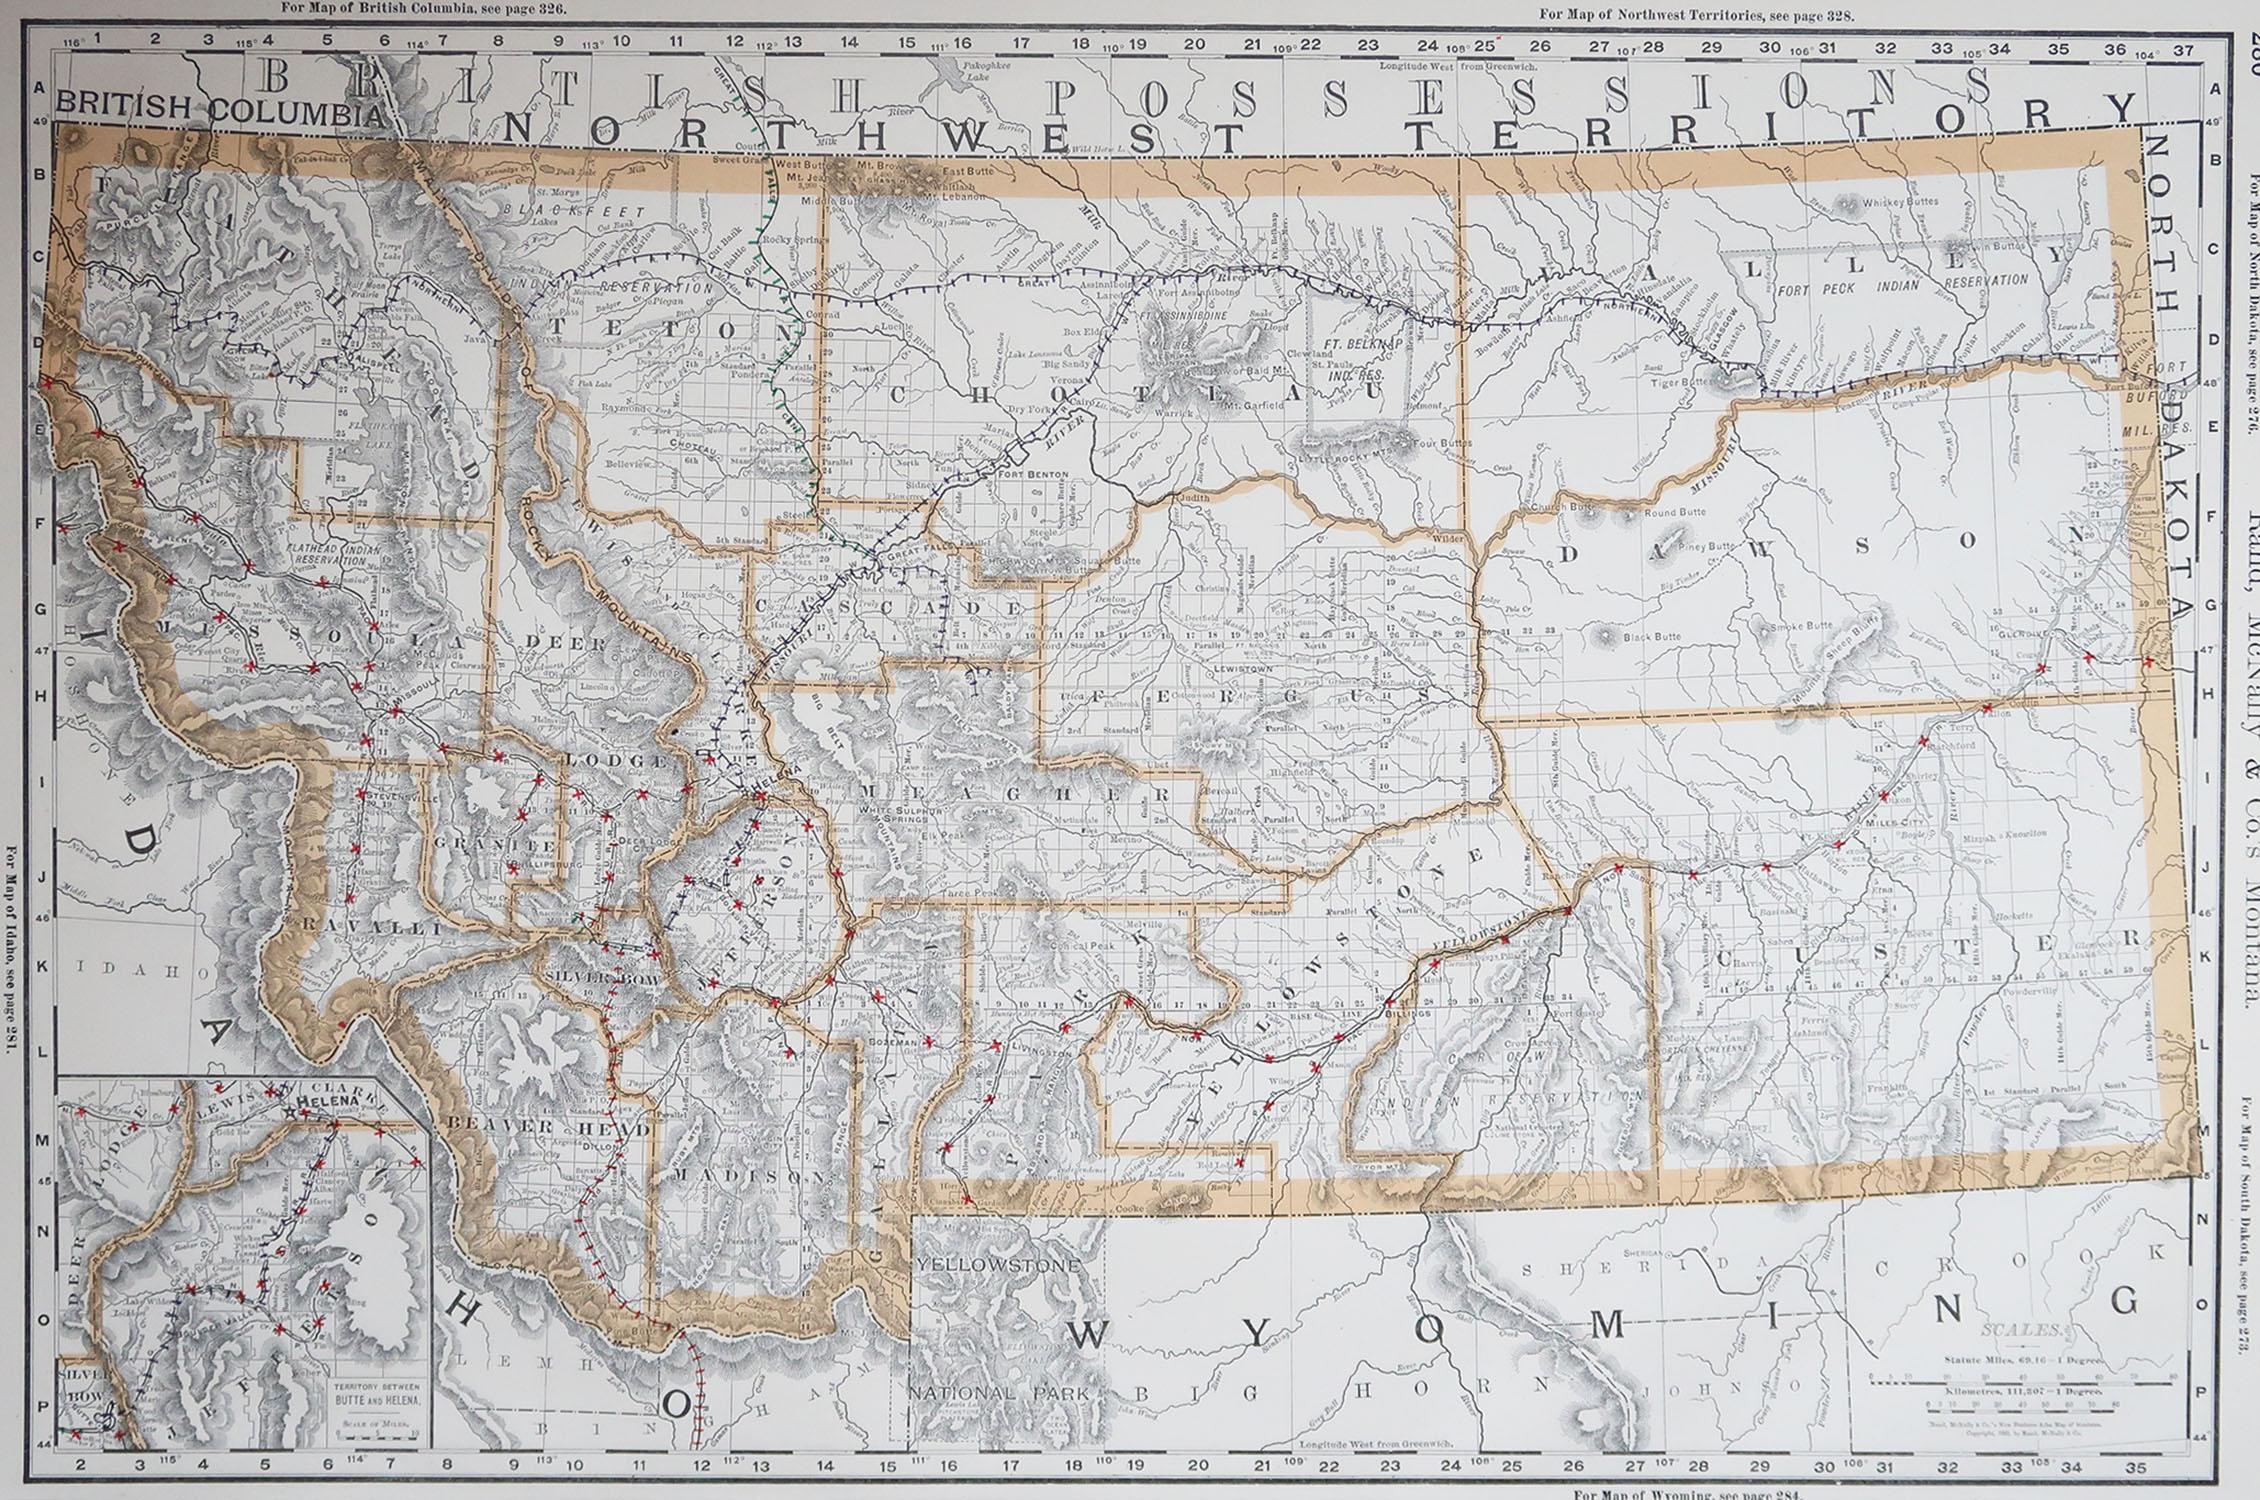 Fabulous map of Montana

Original color.

By Rand, McNally & Co.

Published, 1894.

Unframed.

Free shipping.